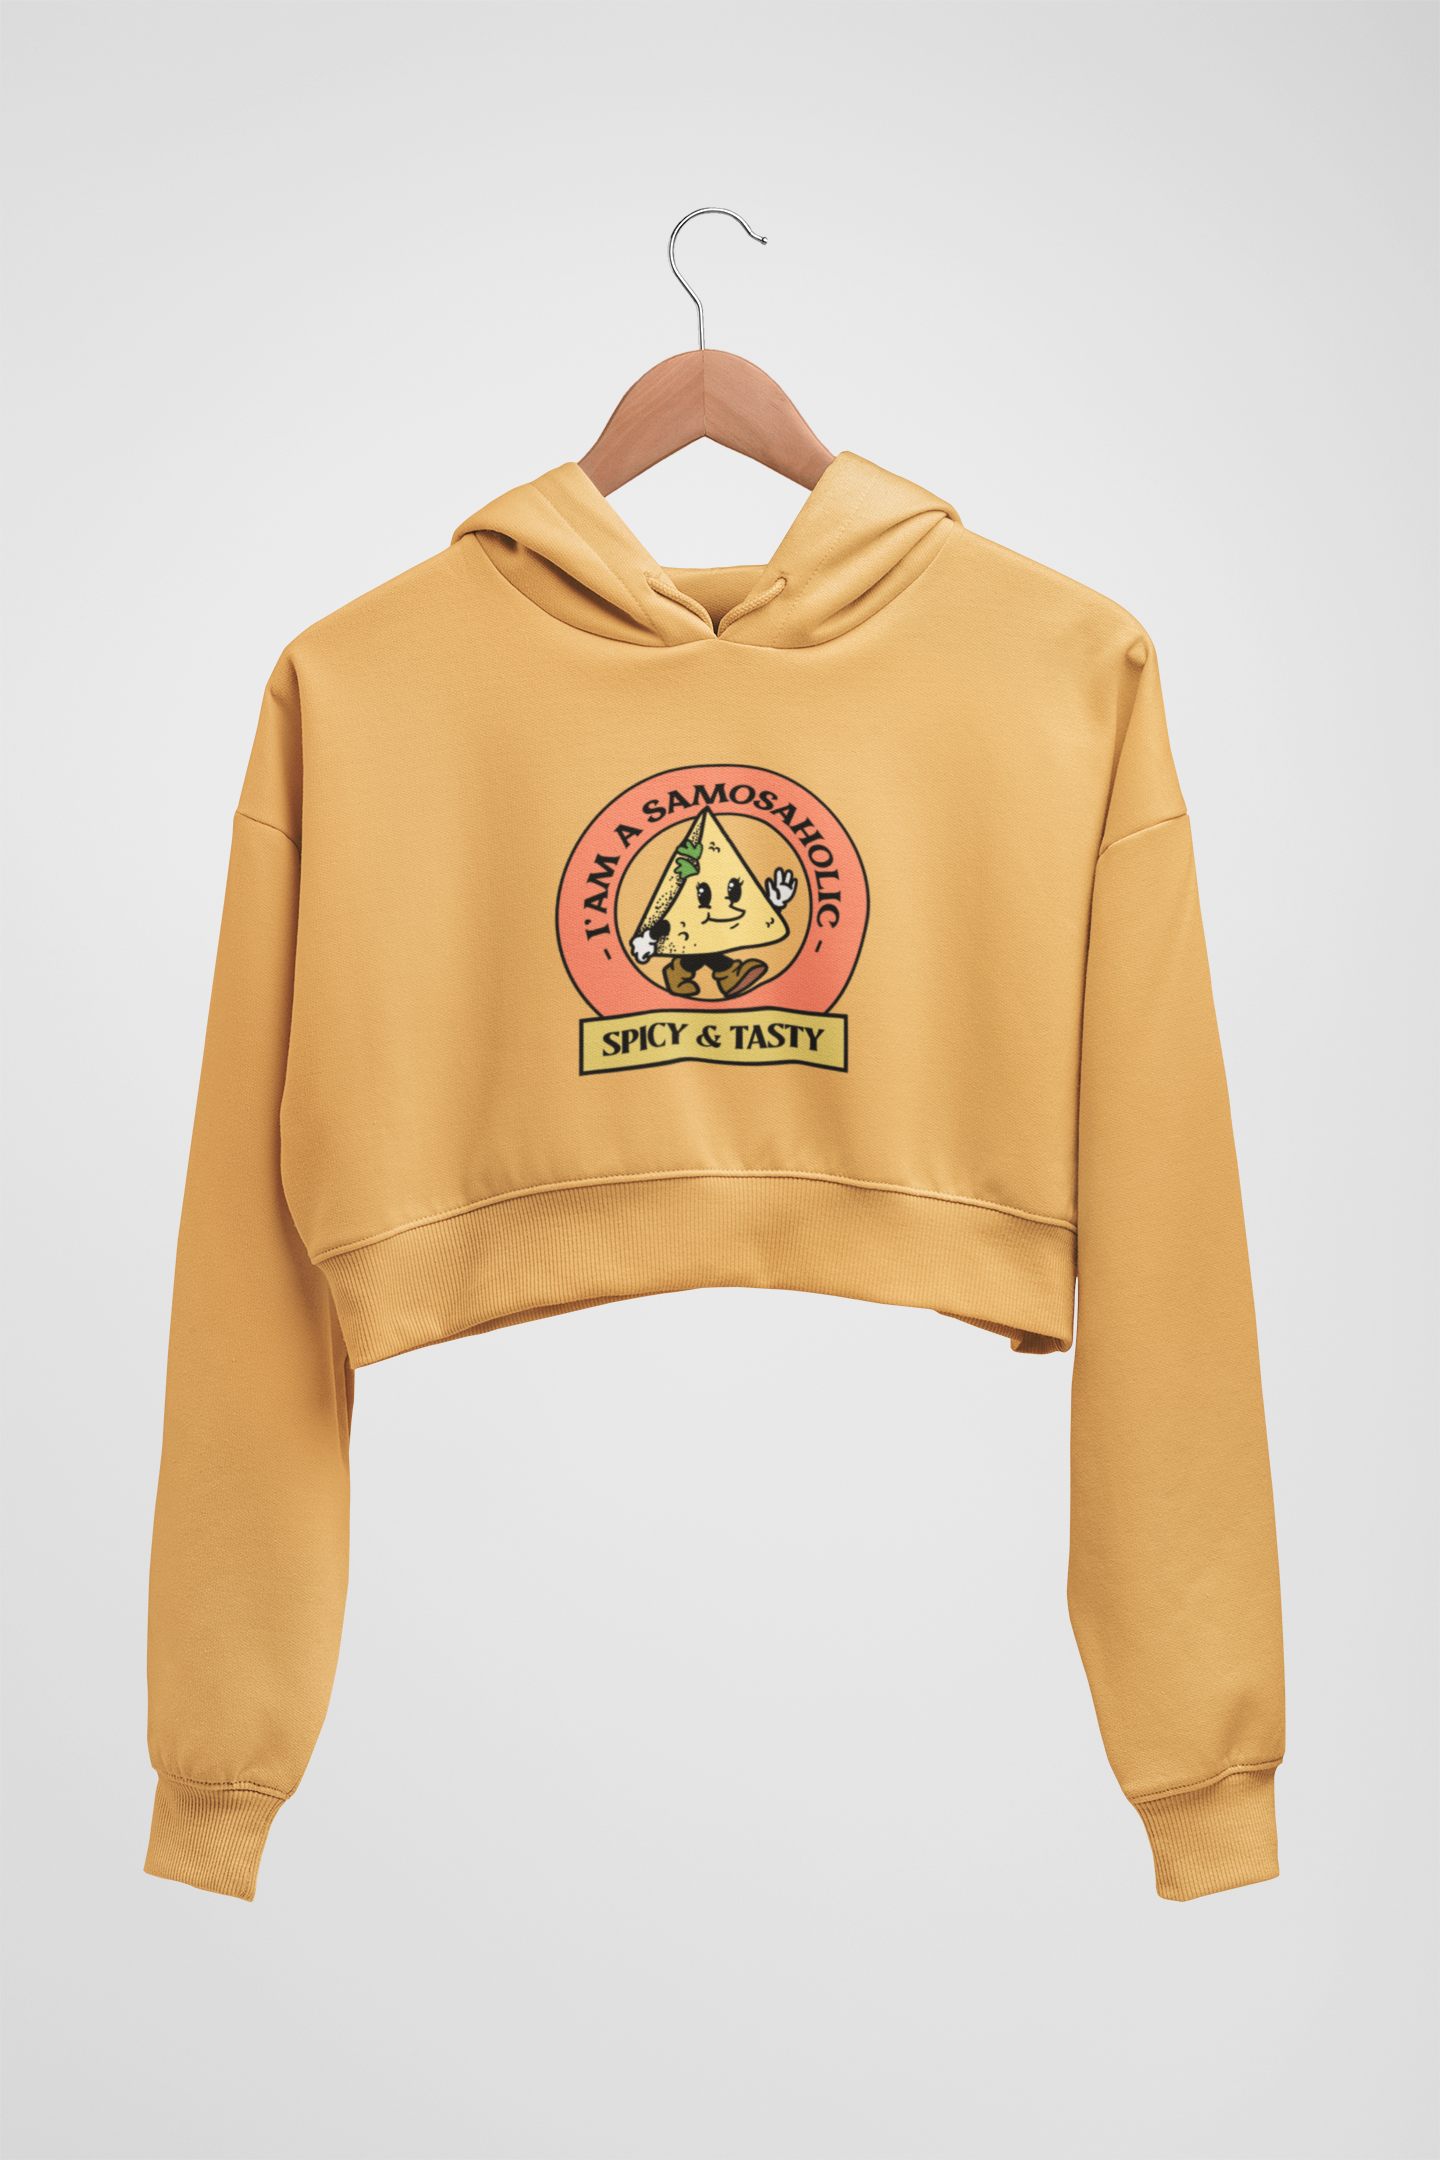 CROP HOODIES MUSTARD YELLOW x SPICY AND TASTY